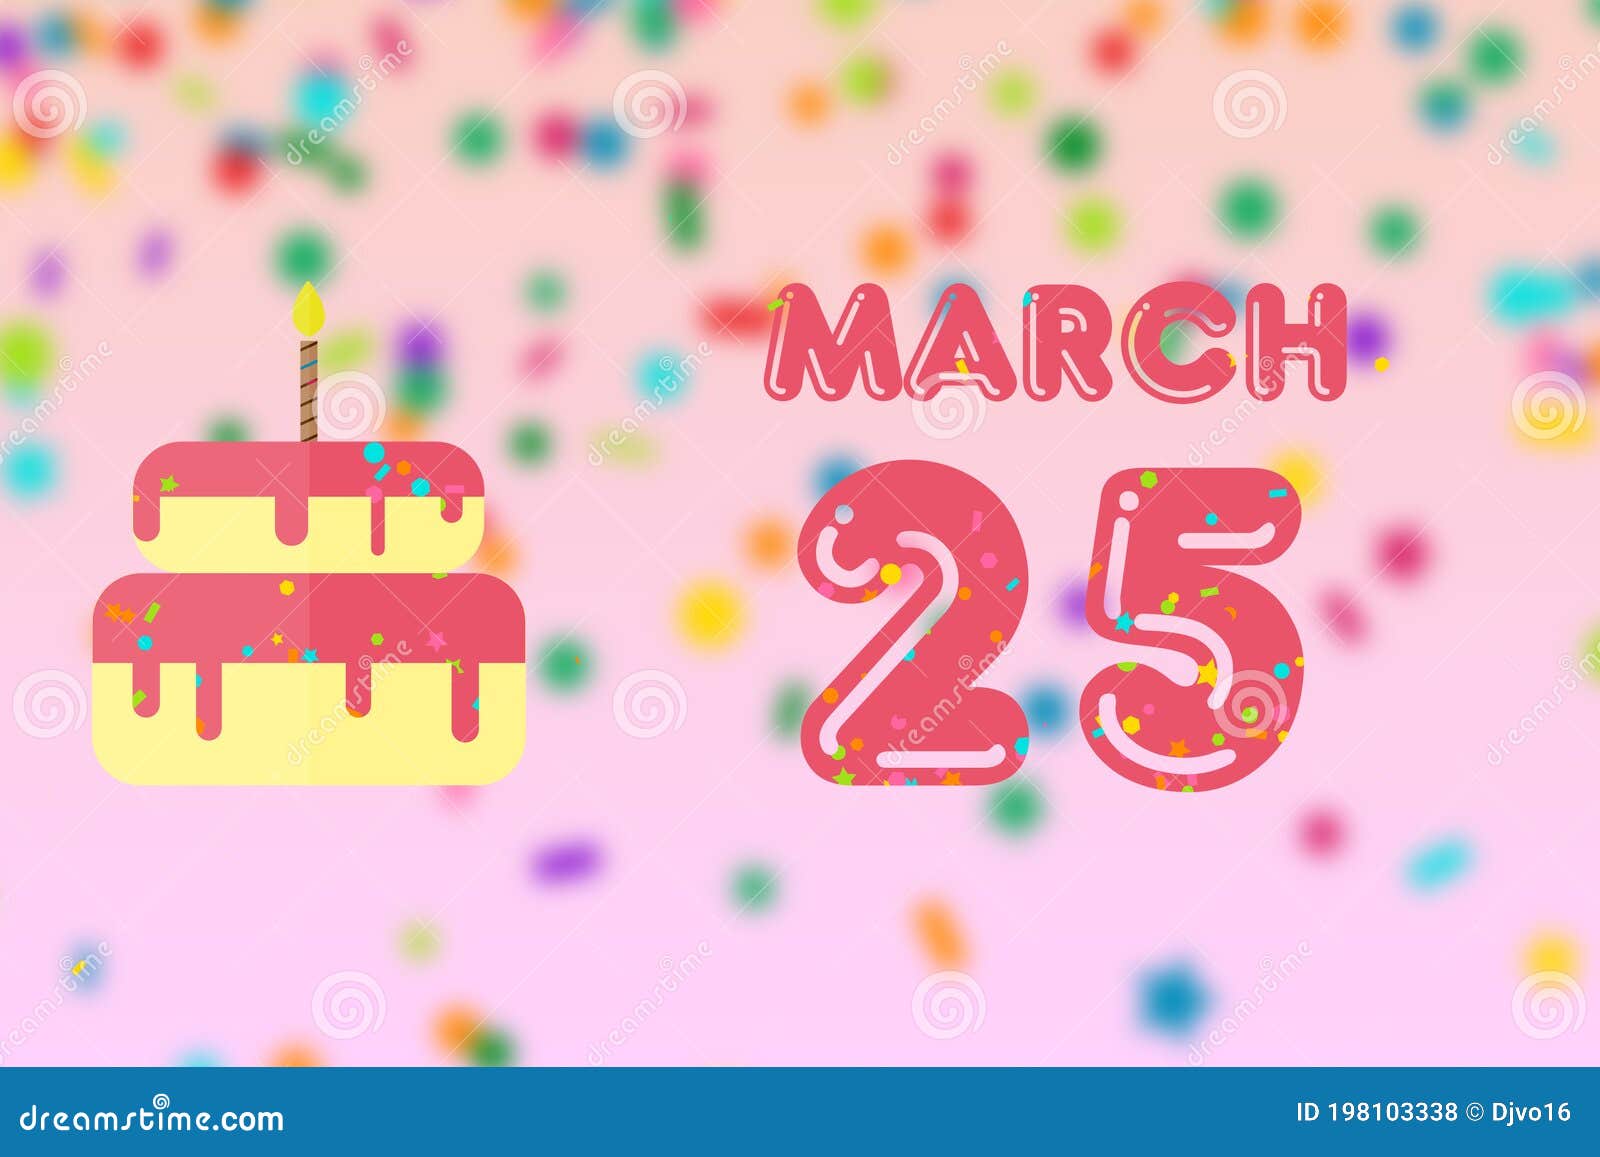 March 25th. Day 25 of Month,Birthday Greeting Card with Date of Birth and Birthday Cake. Spring Month, Day of the Year Concept Stock Illustration - Illustration of cake, greeting: 198103338